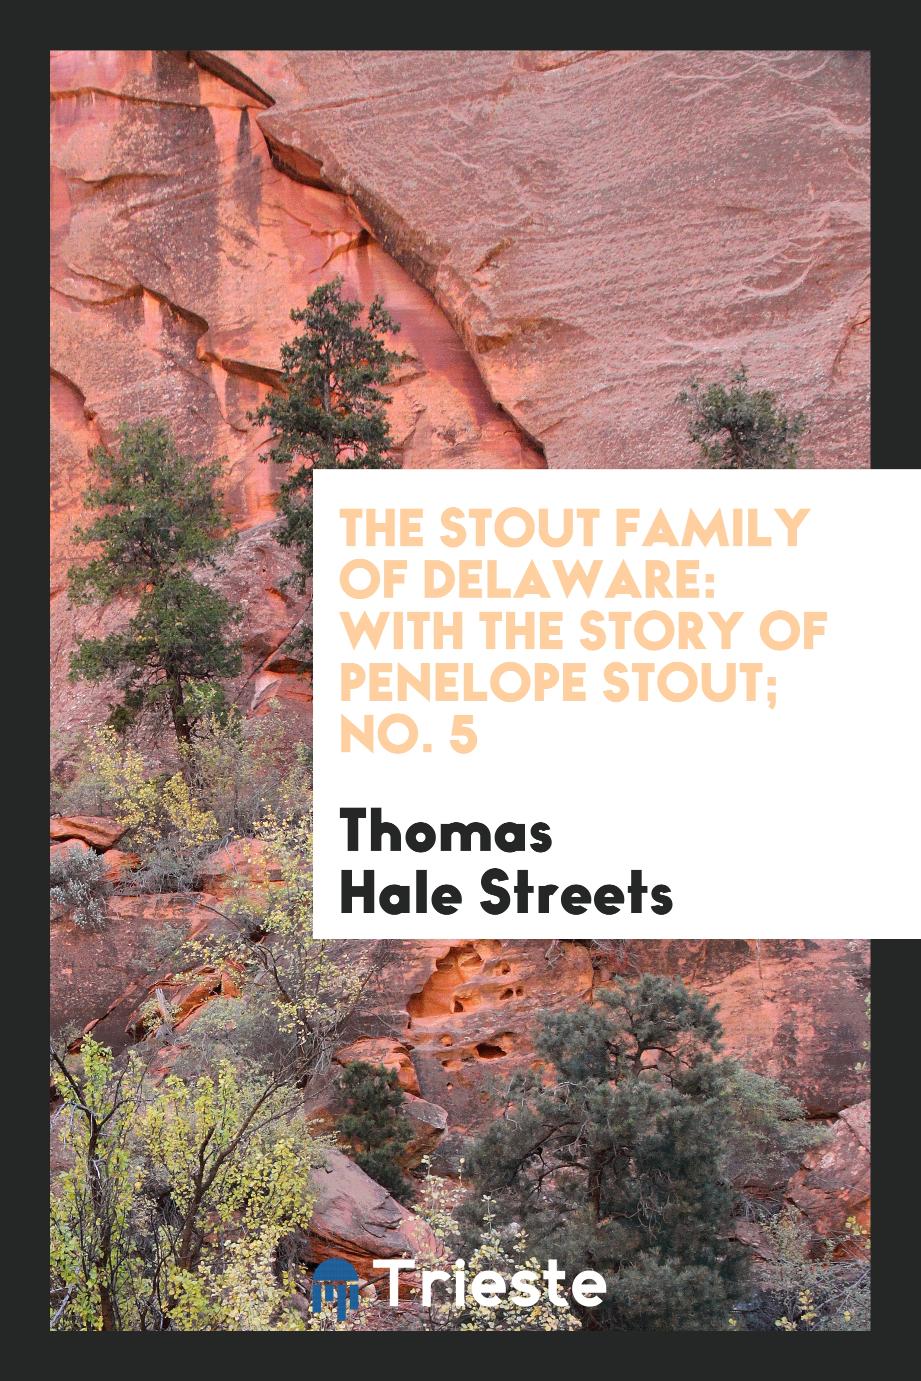 The Stout family of Delaware: with the story of Penelope Stout; No. 5